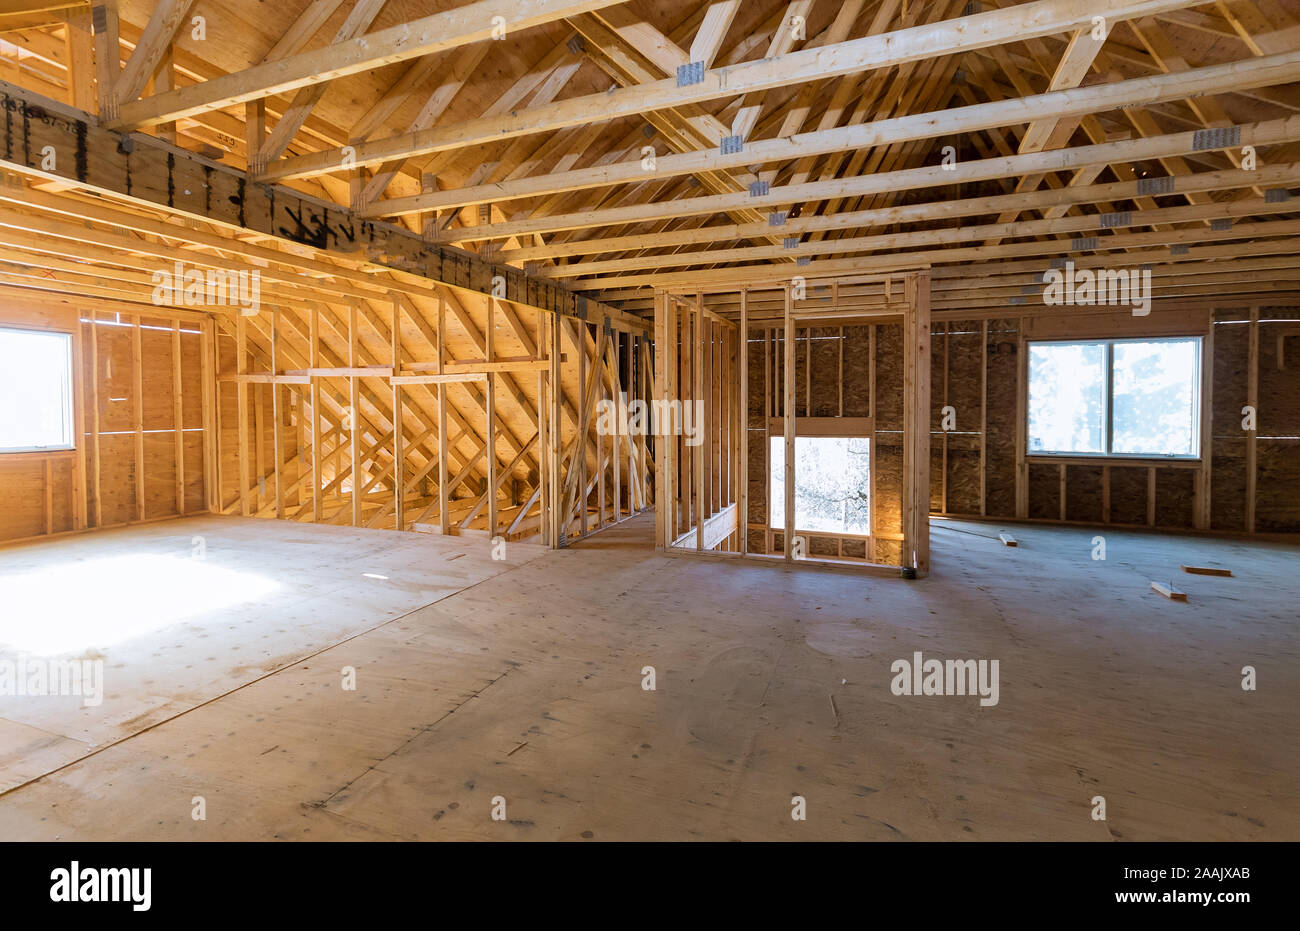 Close-up of beam built home under construction with wooden truss, post and beam framework Stock Photo